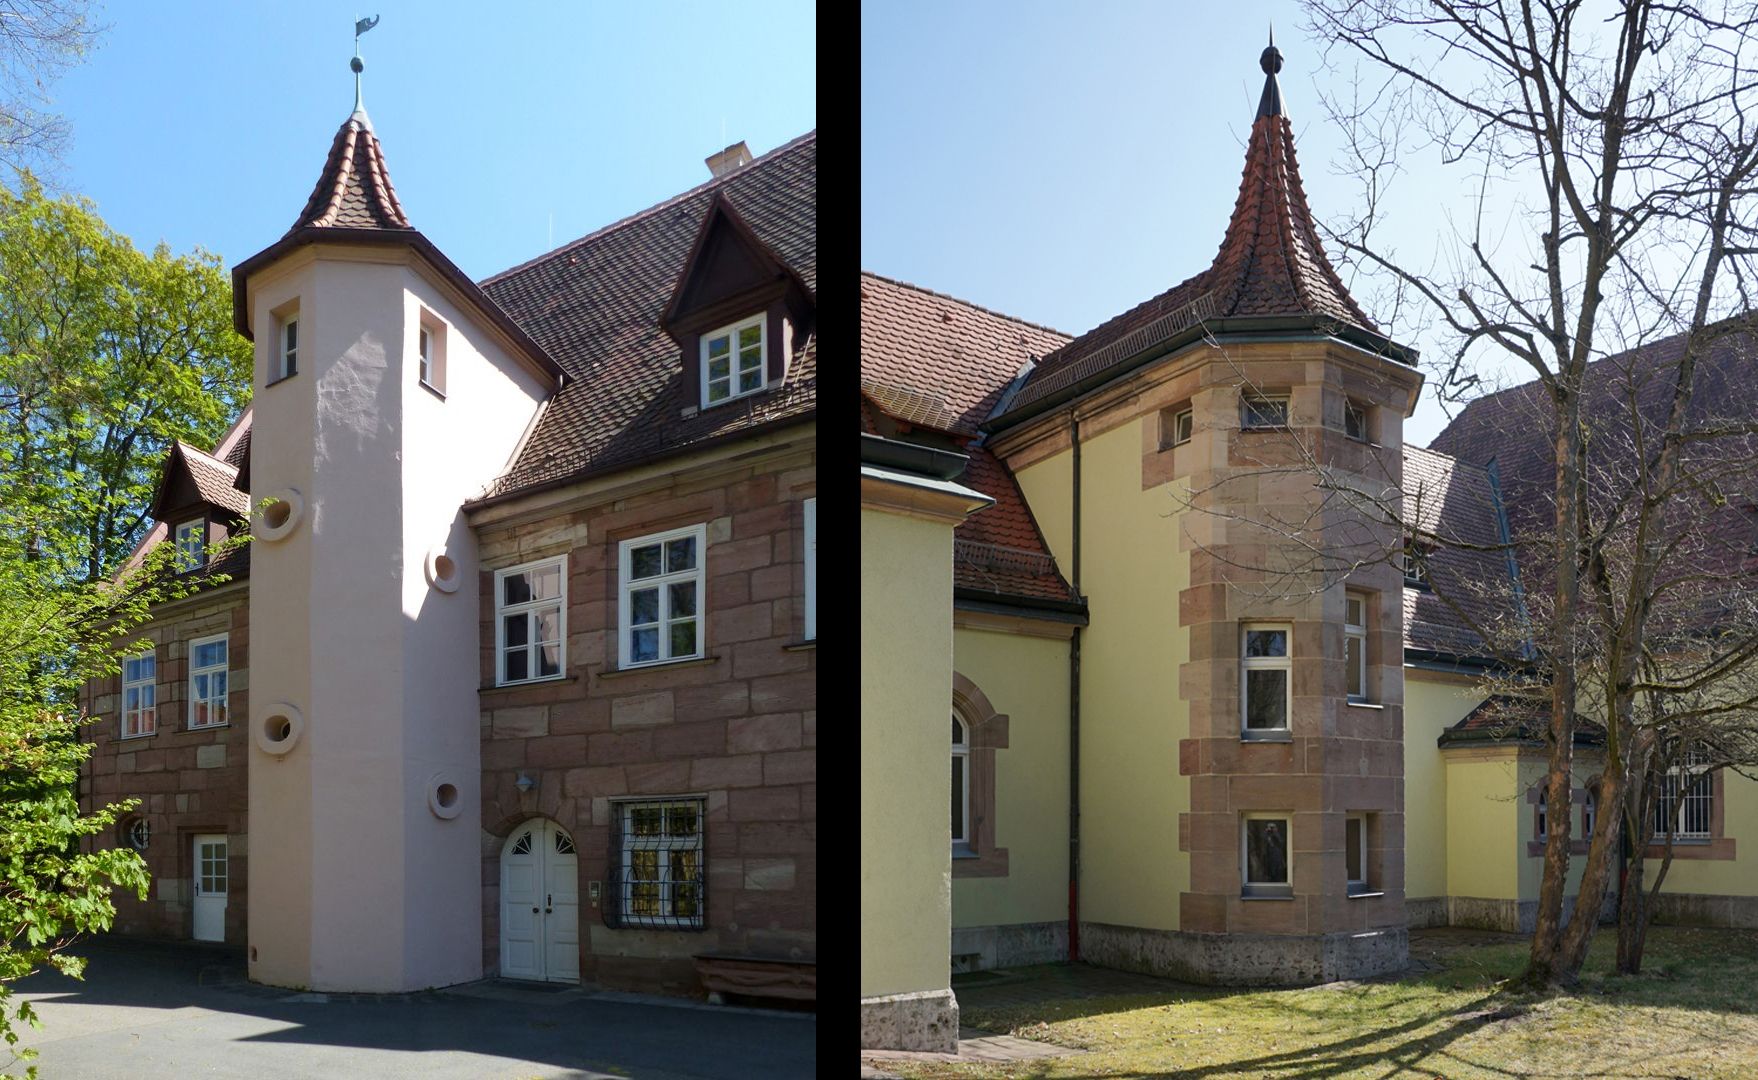 Cemetery buildings Picture comparison with the staircase turret at the Schmausenschloss in Mögeldorf (1682)